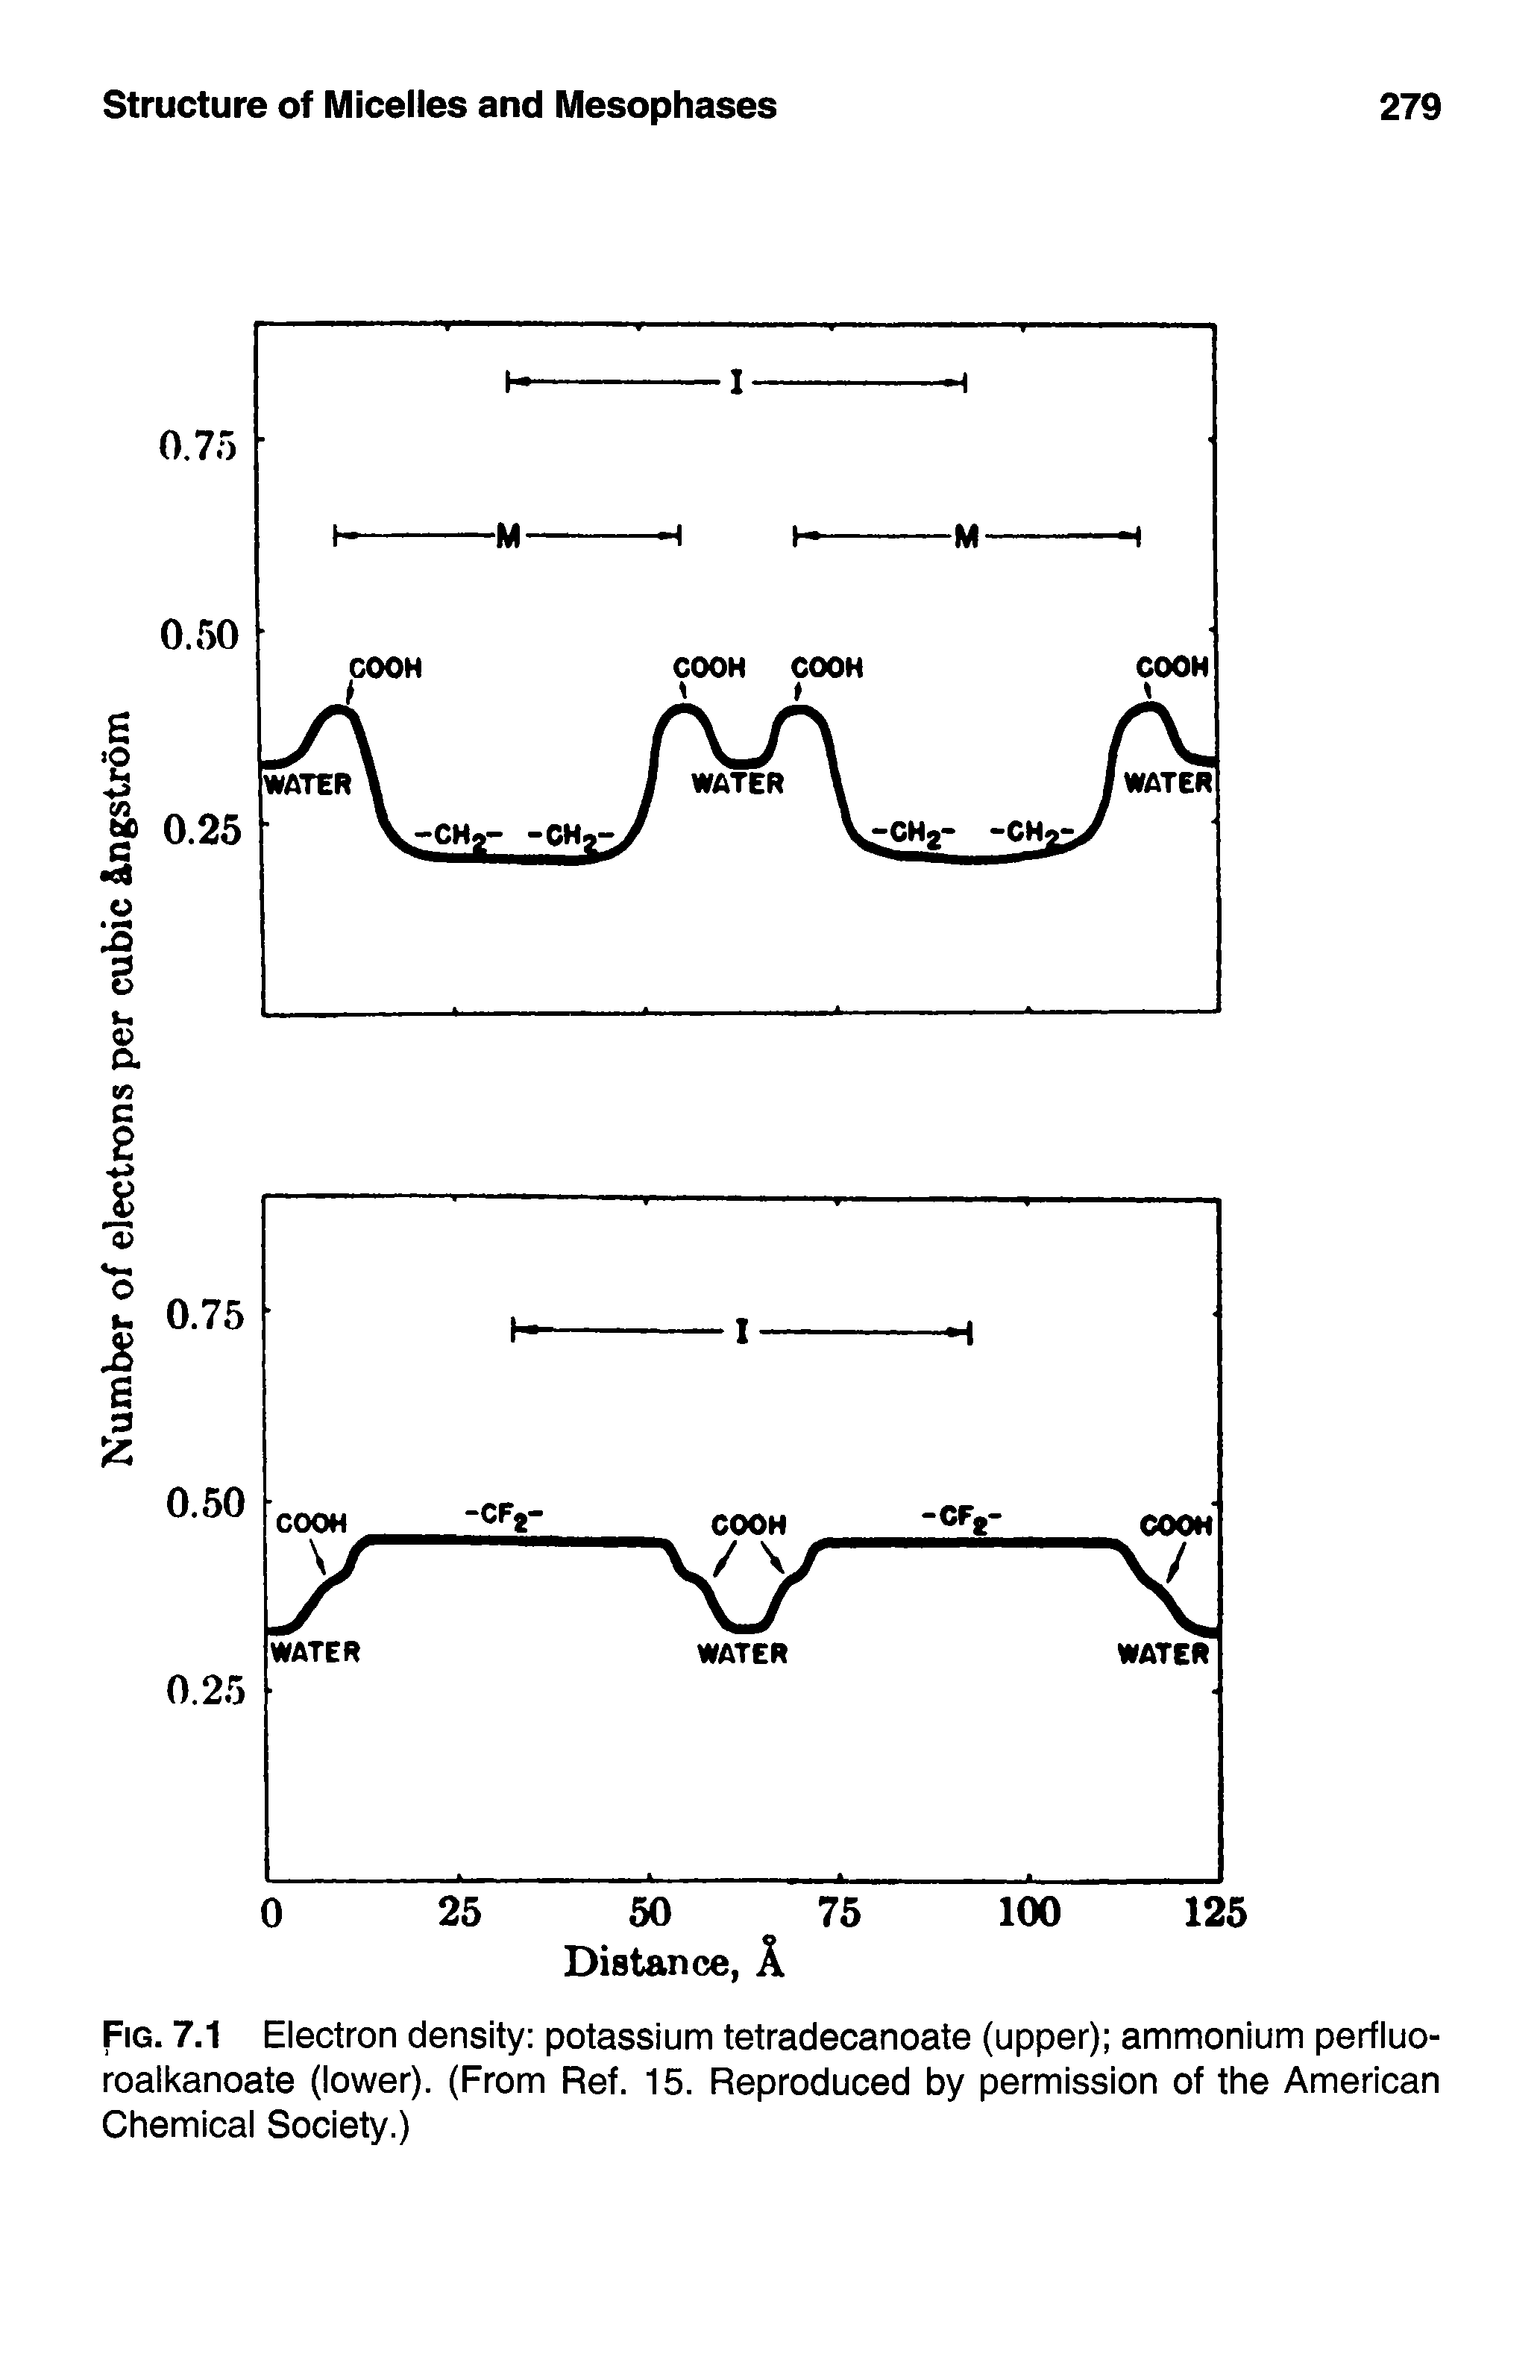 Fig. 7.1 Electron density potassium tetradecanoate (upper) ammonium perfluo-roalkanoate (lower). (From Ref. 15. Reproduced by permission of the American Chemical Society.)...